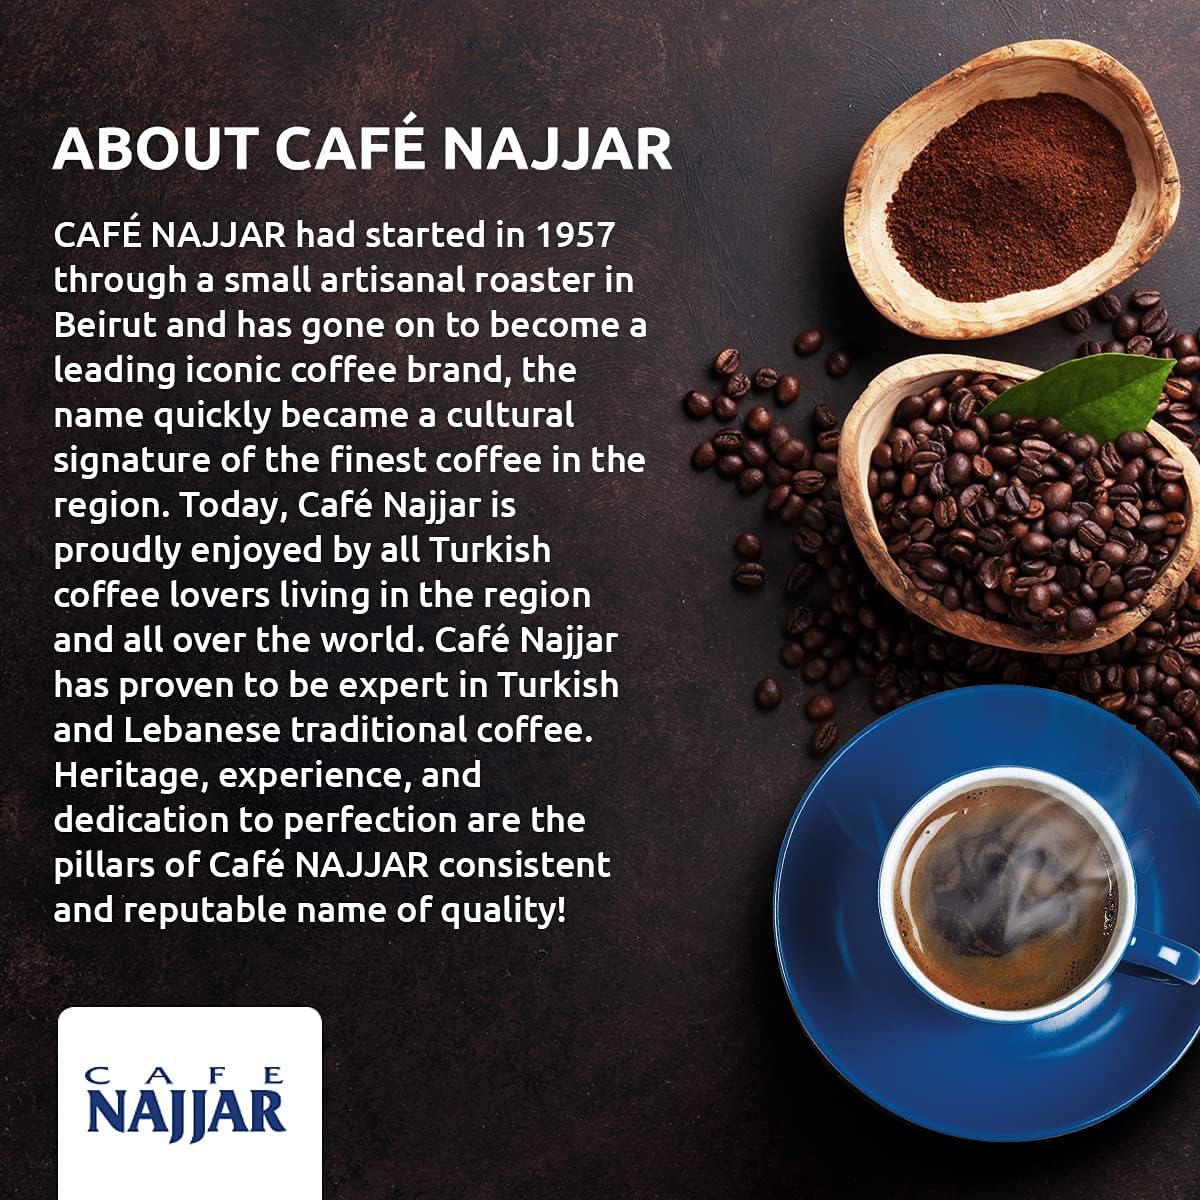 Cafe Najjar Classic Coffee with Cardamom Vacuum Sealed Bag 450g - Mideast Grocers